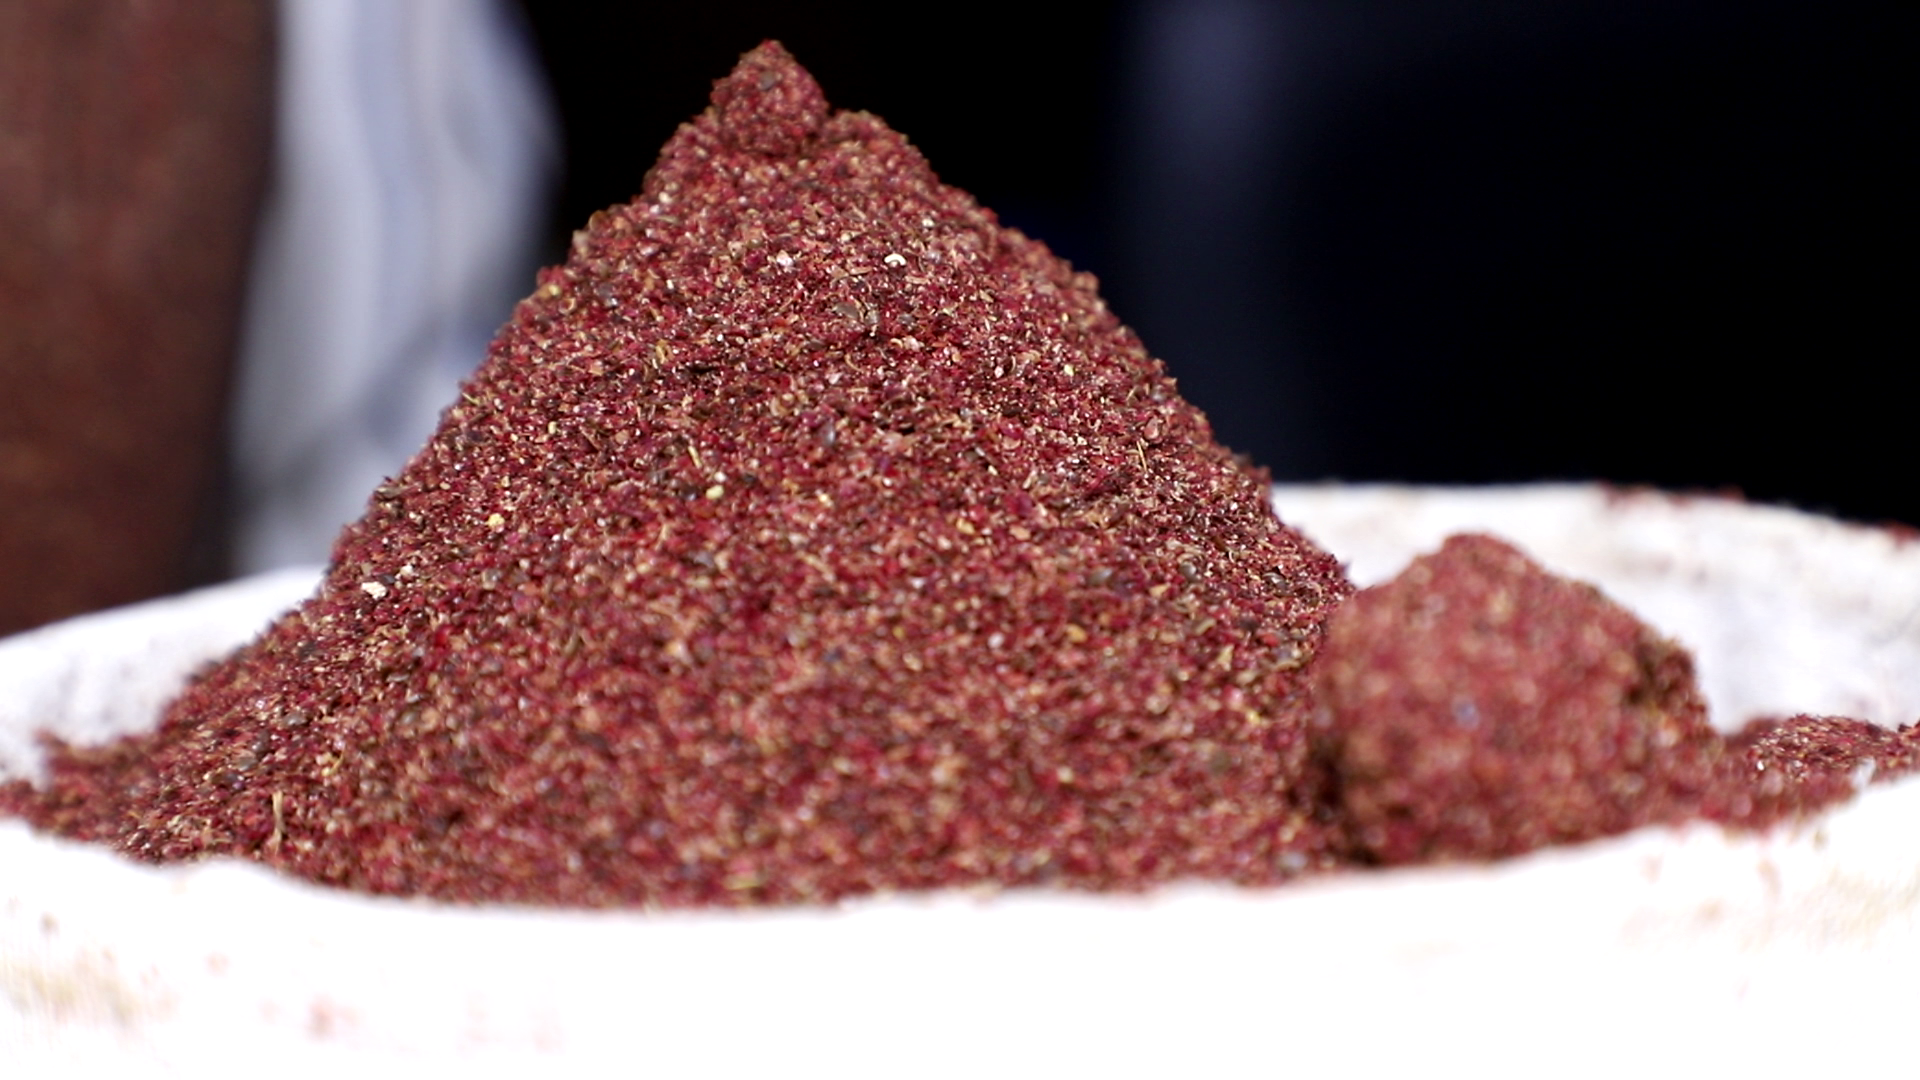 The Tangy Delight: Exploring the Versatility and Benefits of Sumac